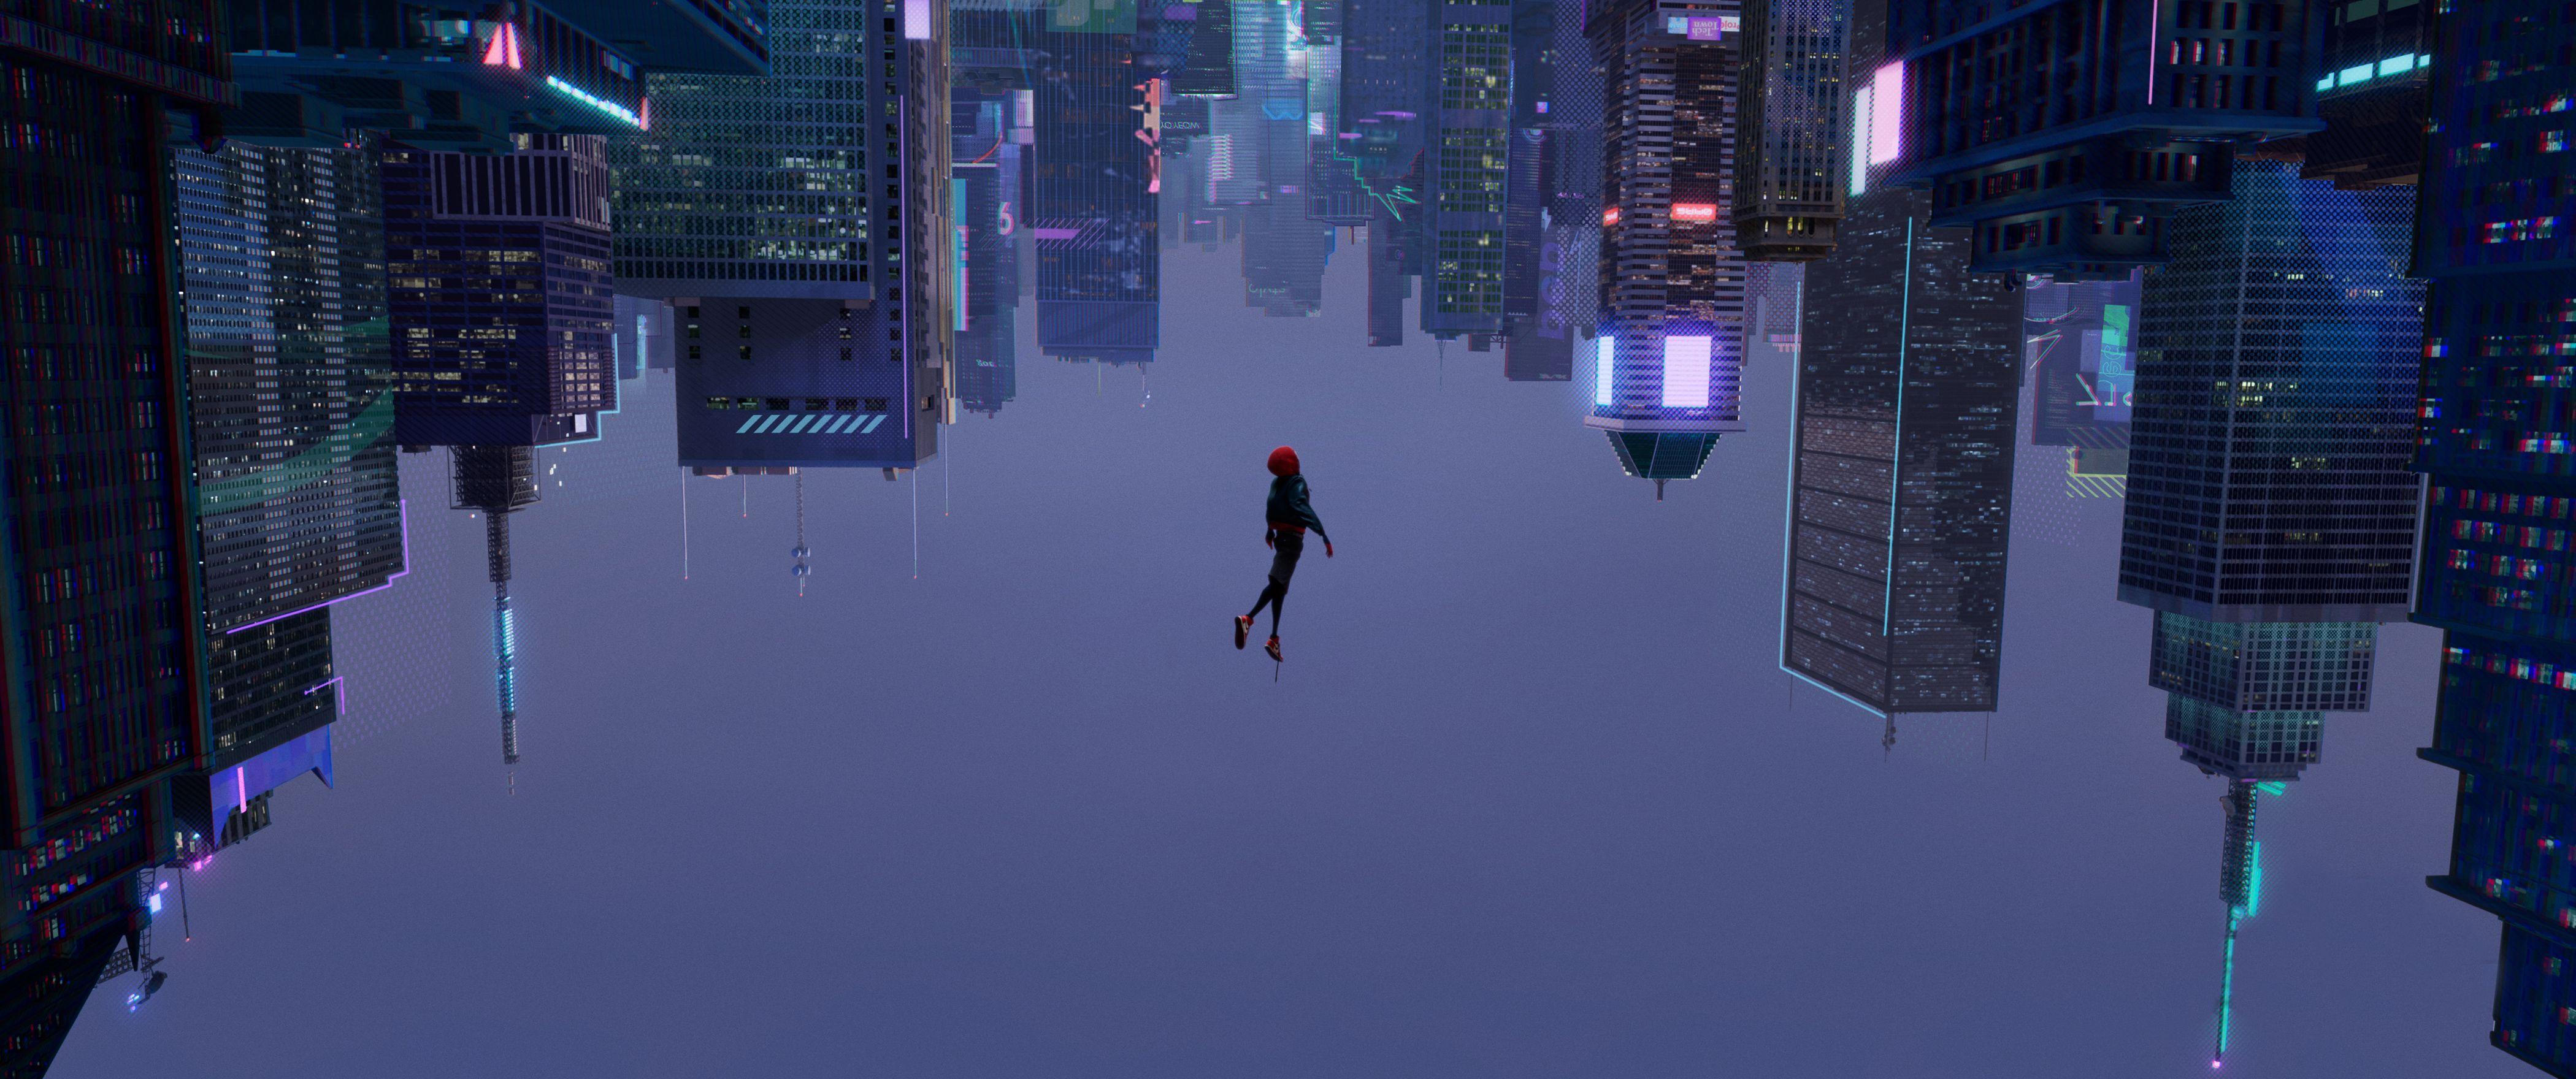 spider man into the spider verse iphone xs wallpaper